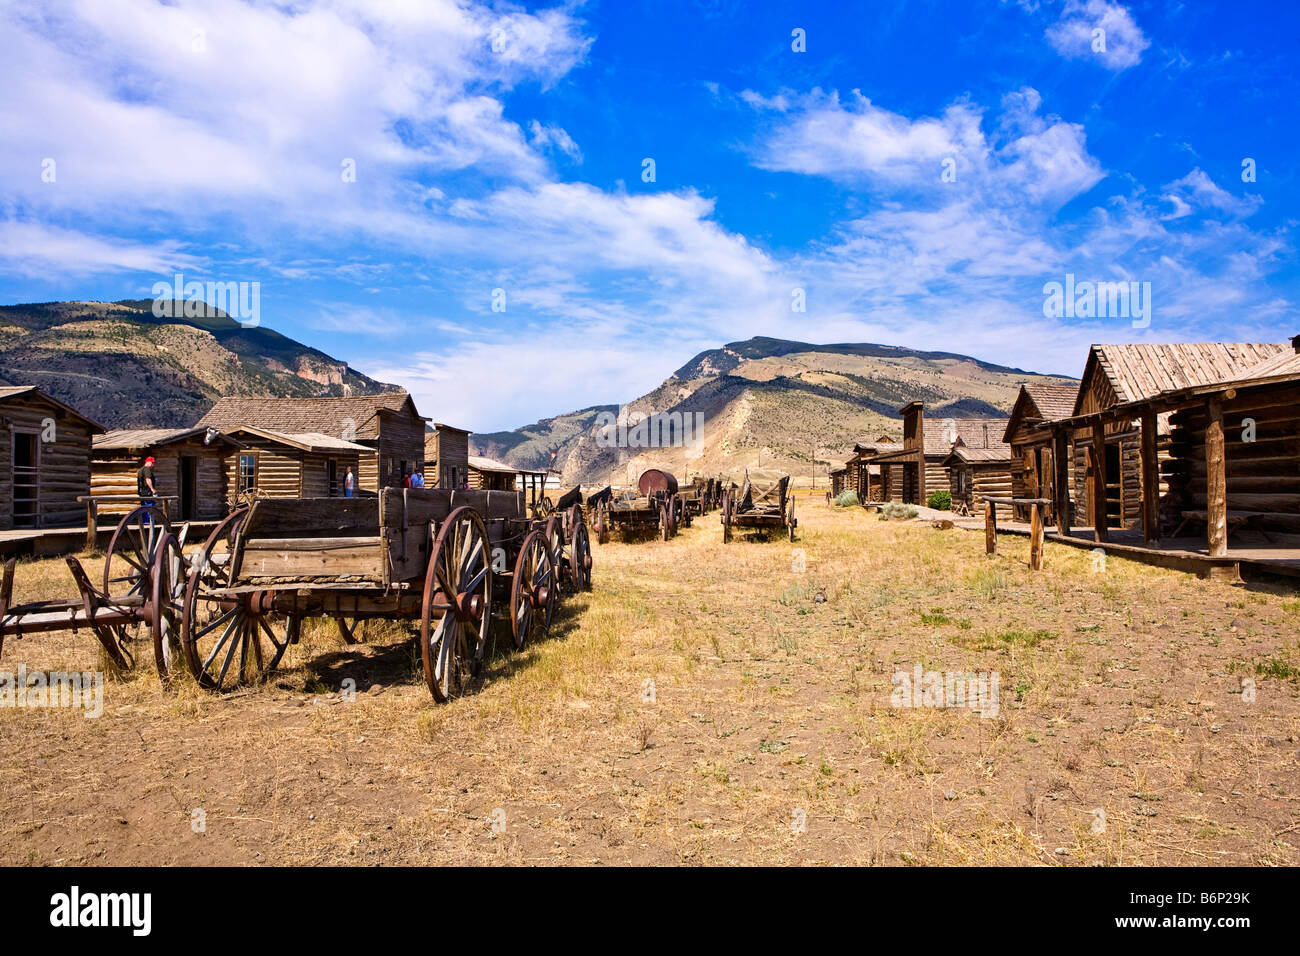 Stock photo looking down the main street of Old Trail Town Wyoming with some horse drawn vehicles abandoned Stock Photo